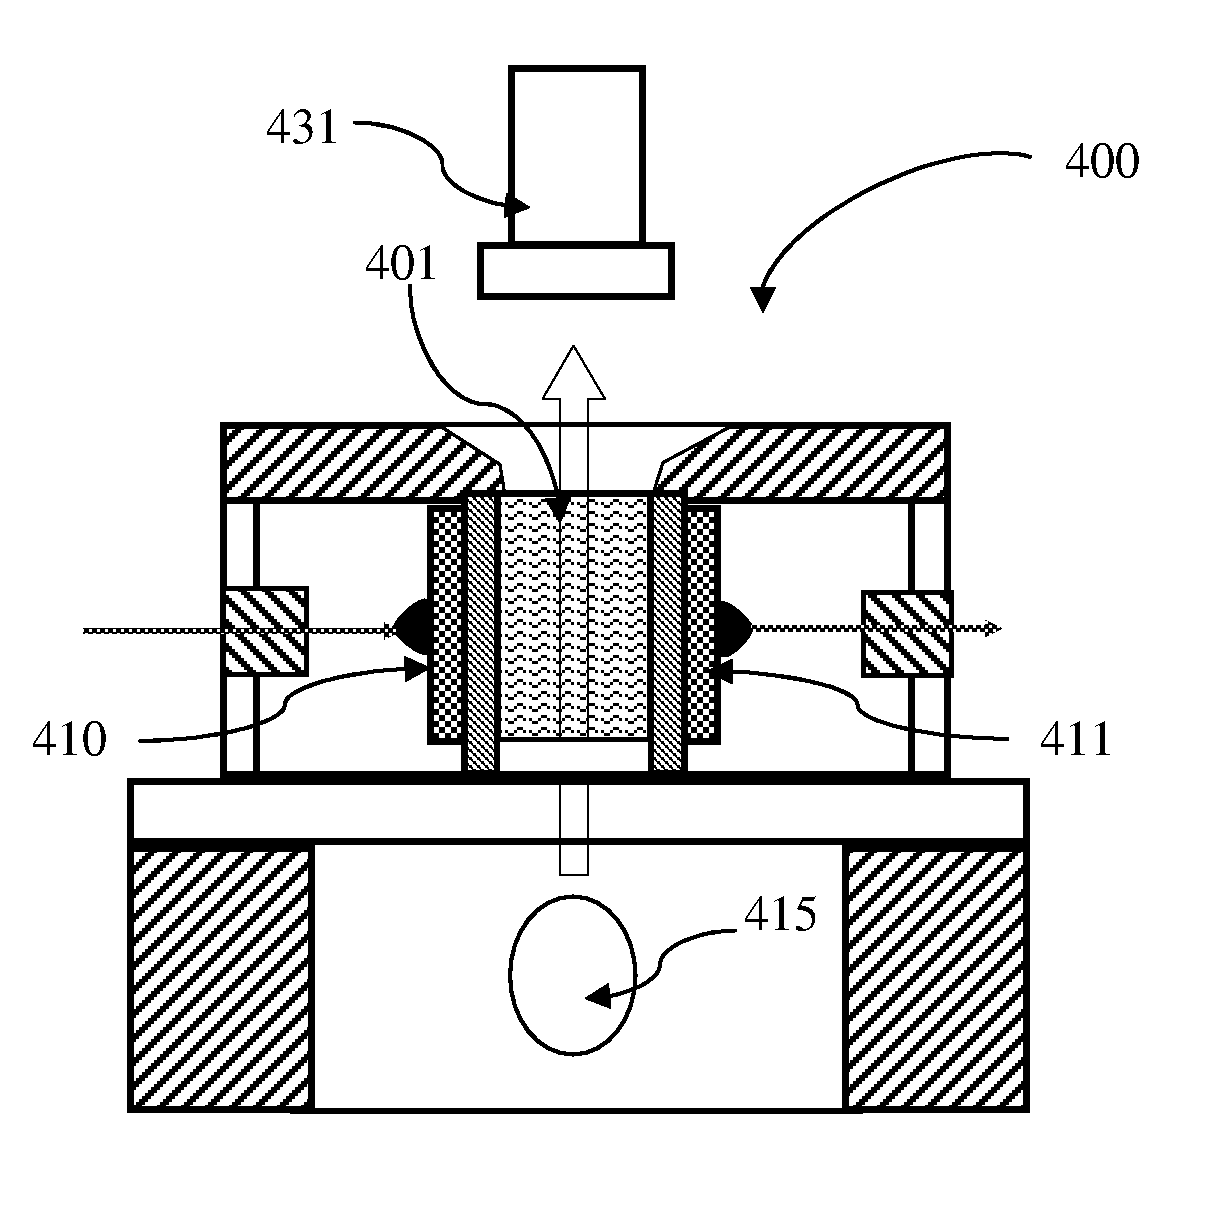 Method and device for ultrasound assisted particle agglutination assay